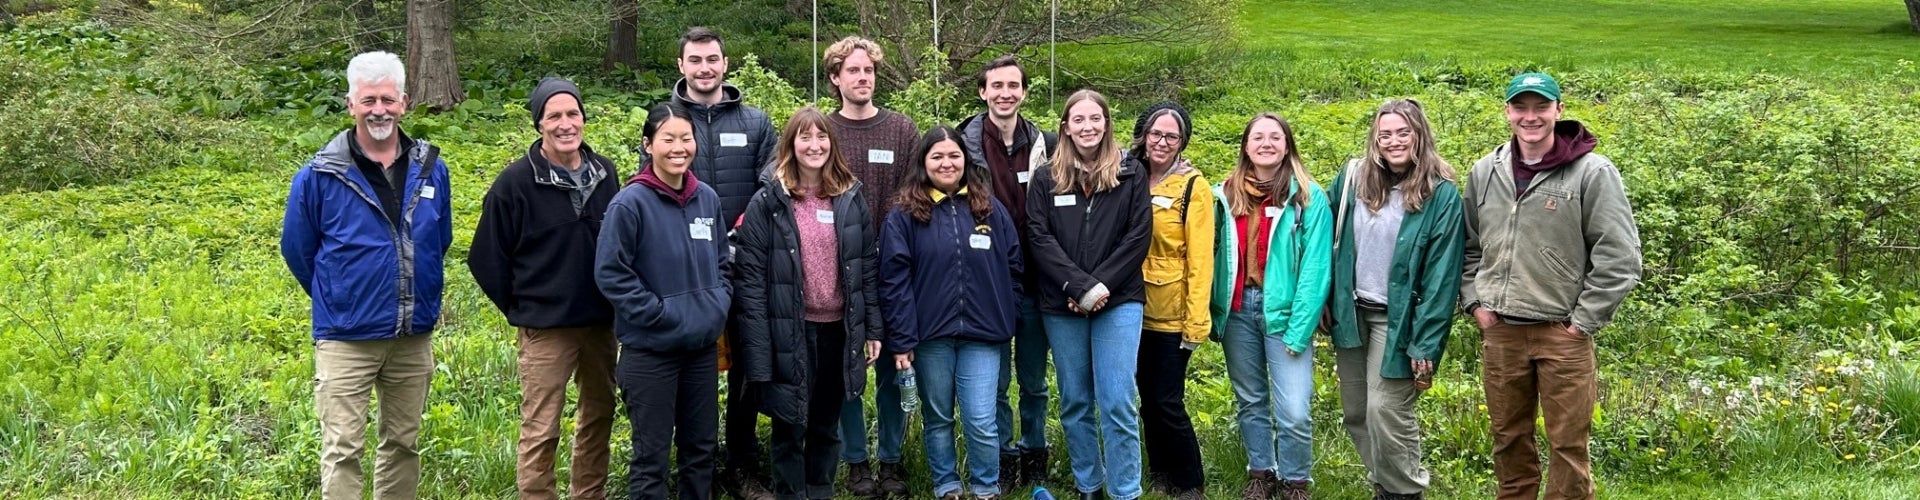 A group of interns stand in an outdoor green space and smile for the camera. 